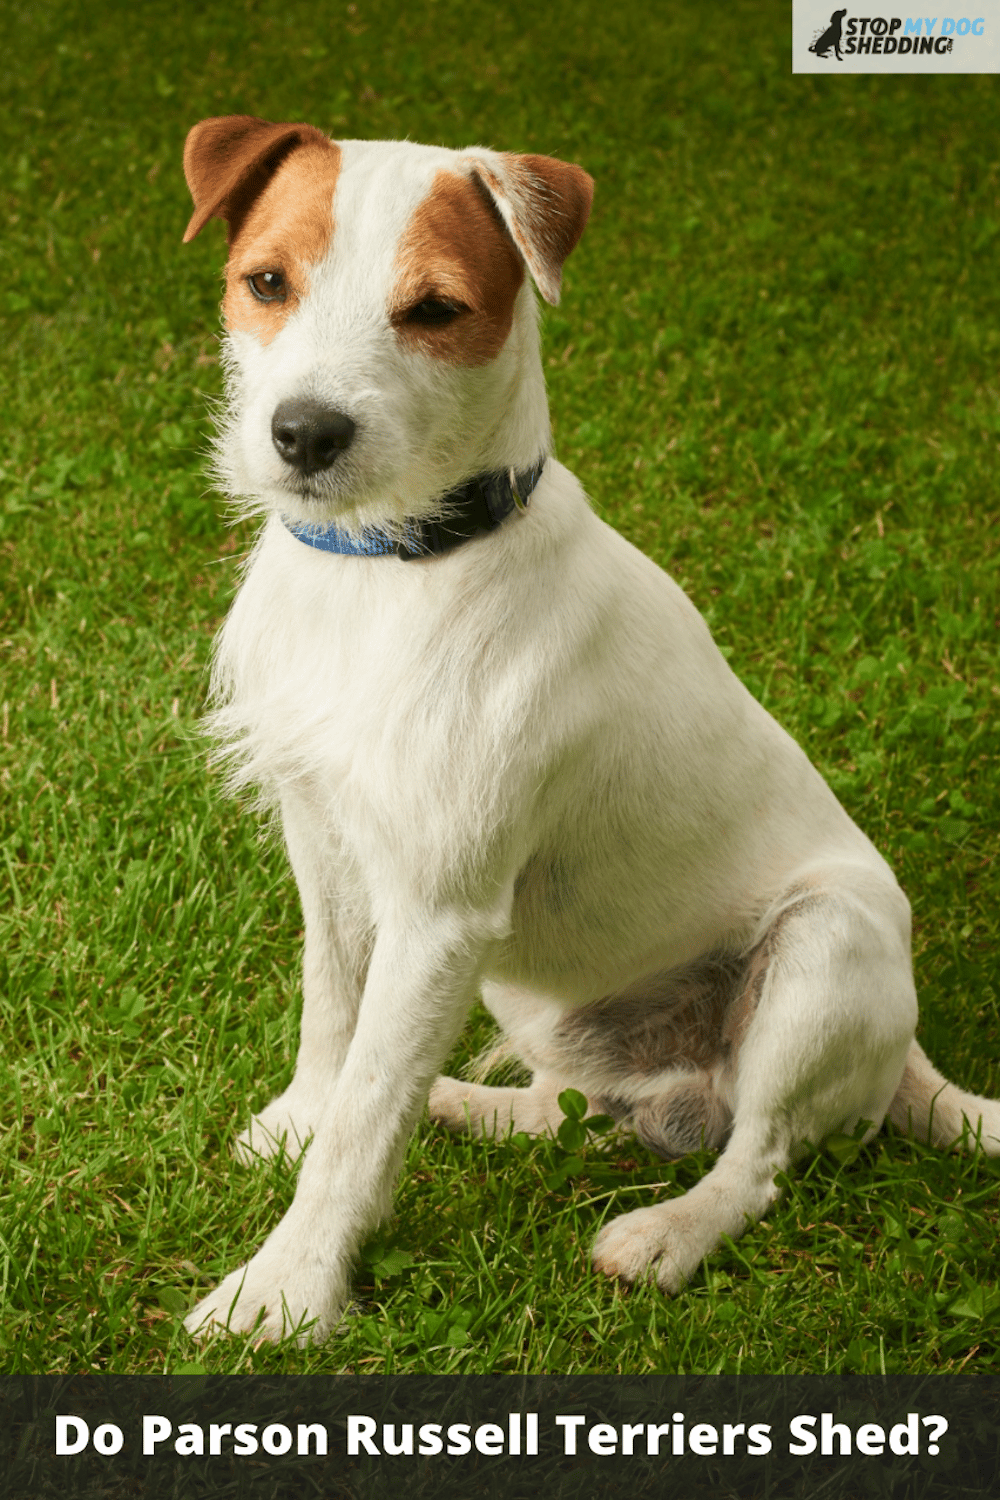 Do Parson Russell Terriers Shed?